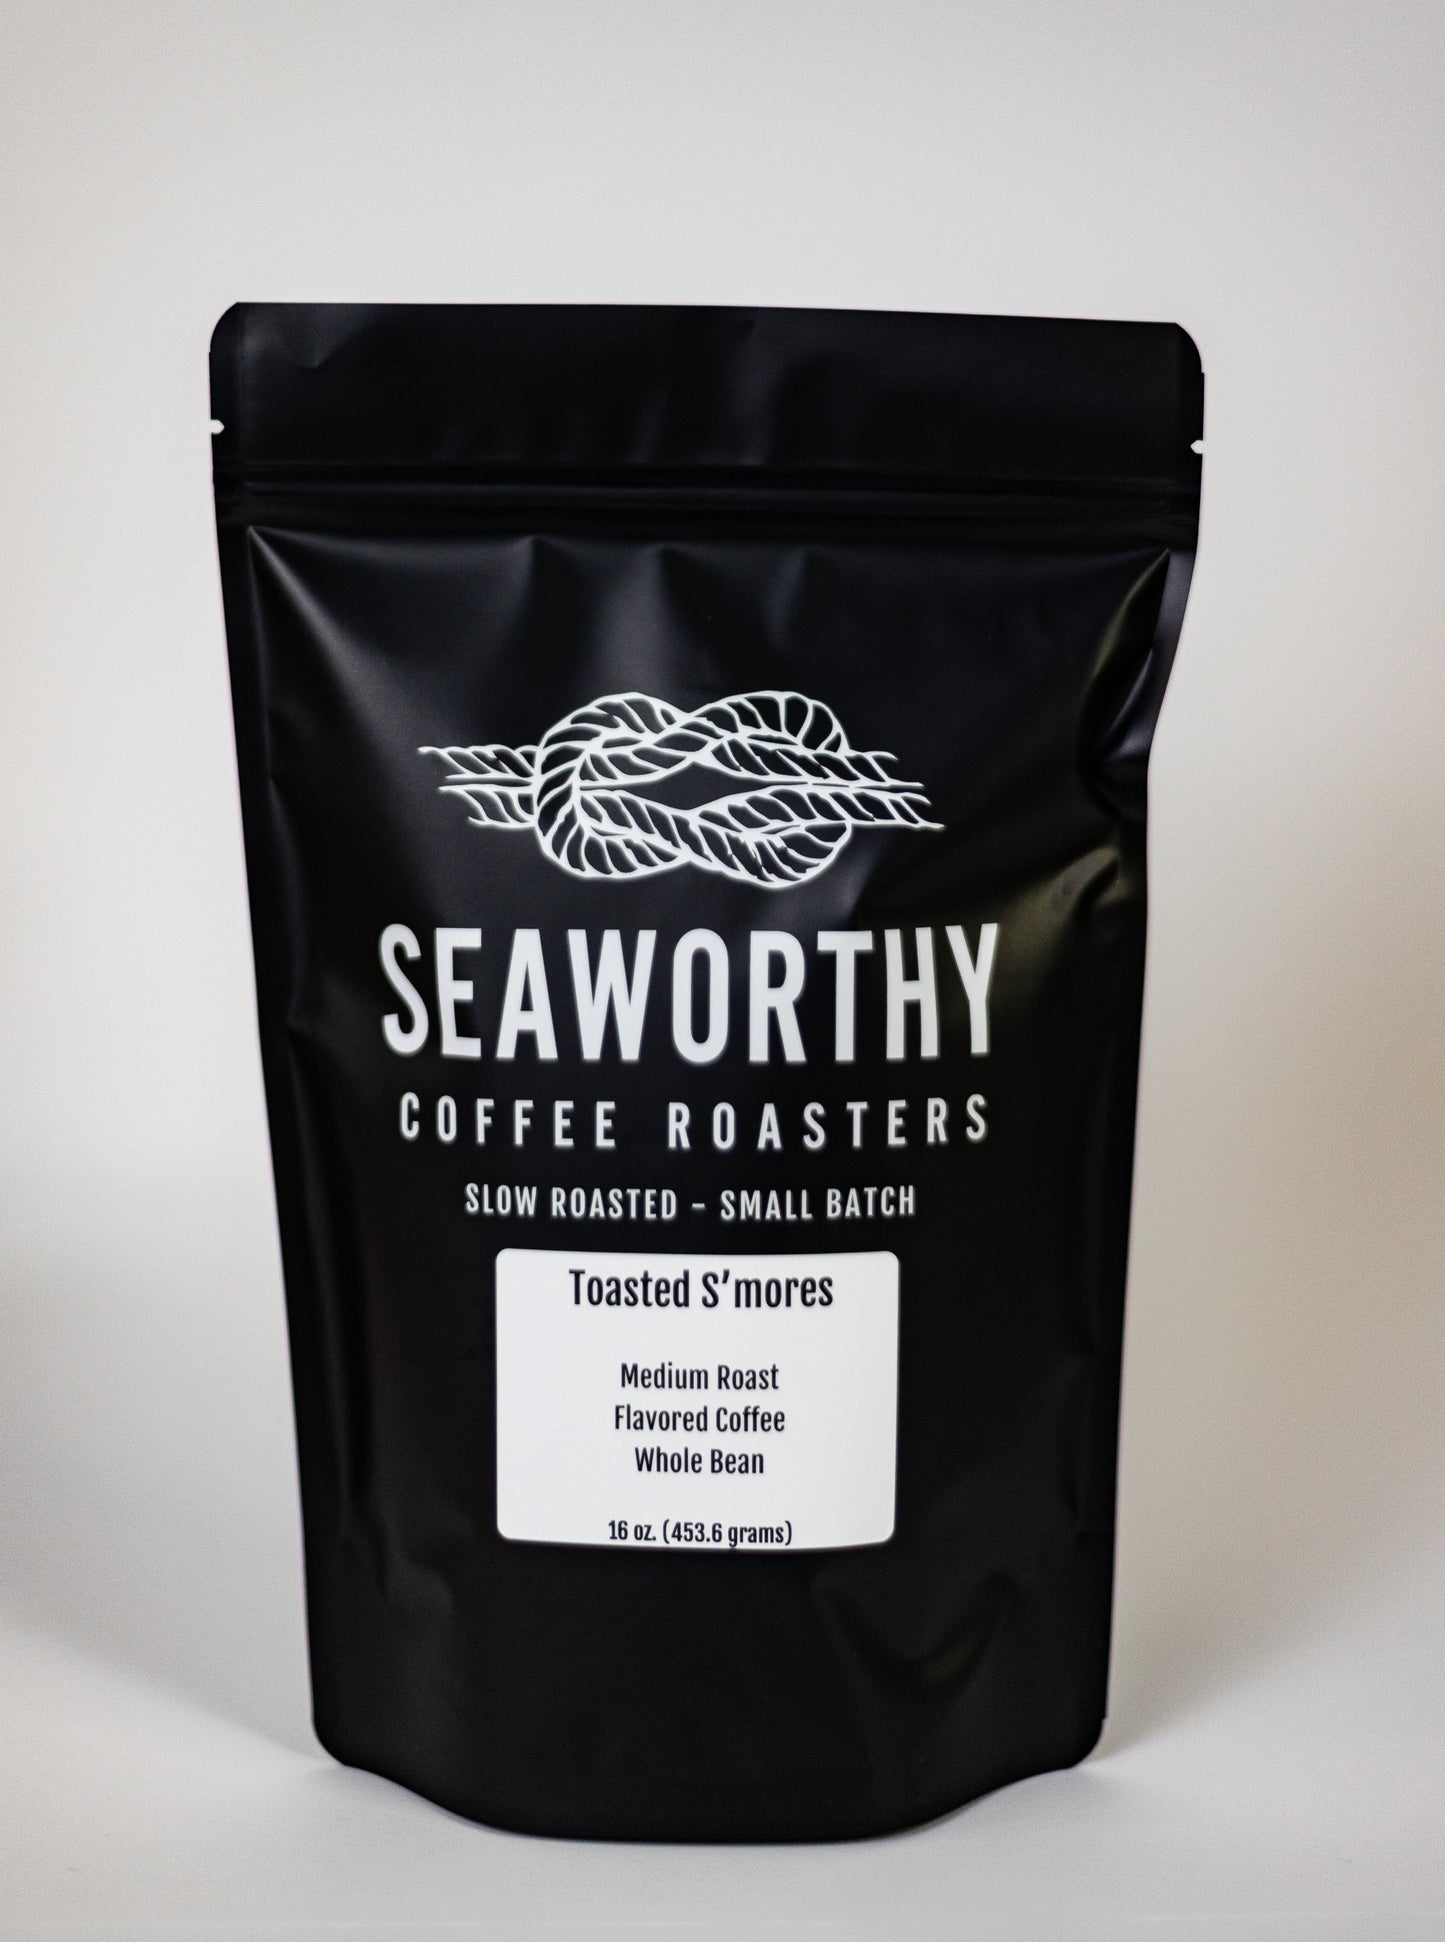 Seaworthy slow roasted, small batch, low acid coffee. 1 pound bag of Toasted Smores flavored coffee.